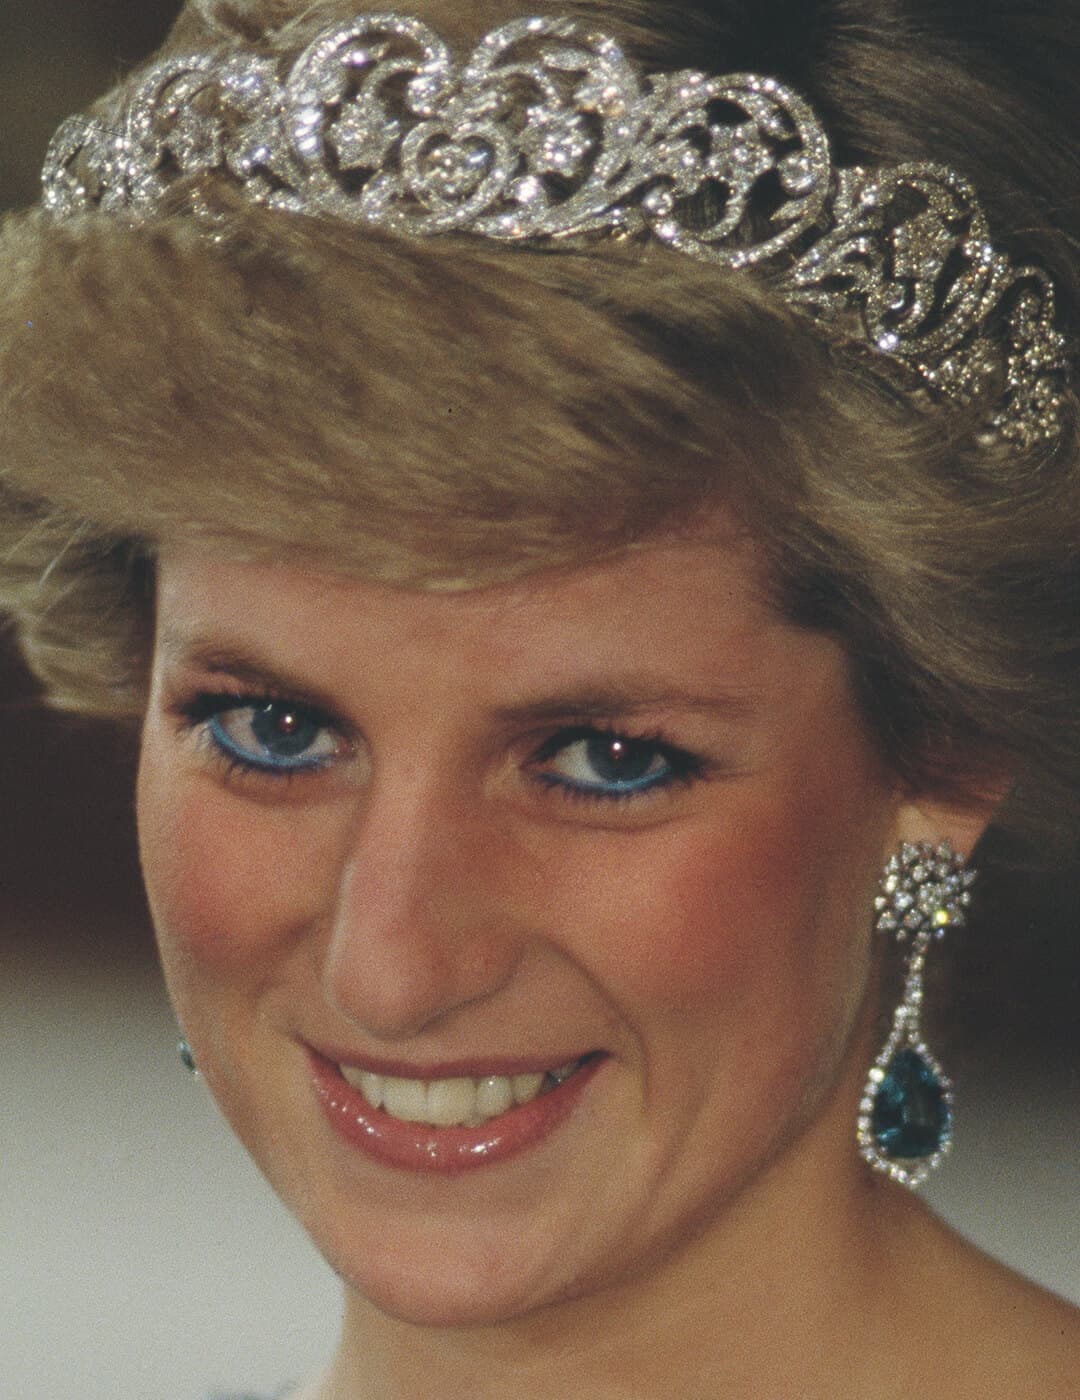 A photo of Diana, Princess of Wales sporting a blue liner look